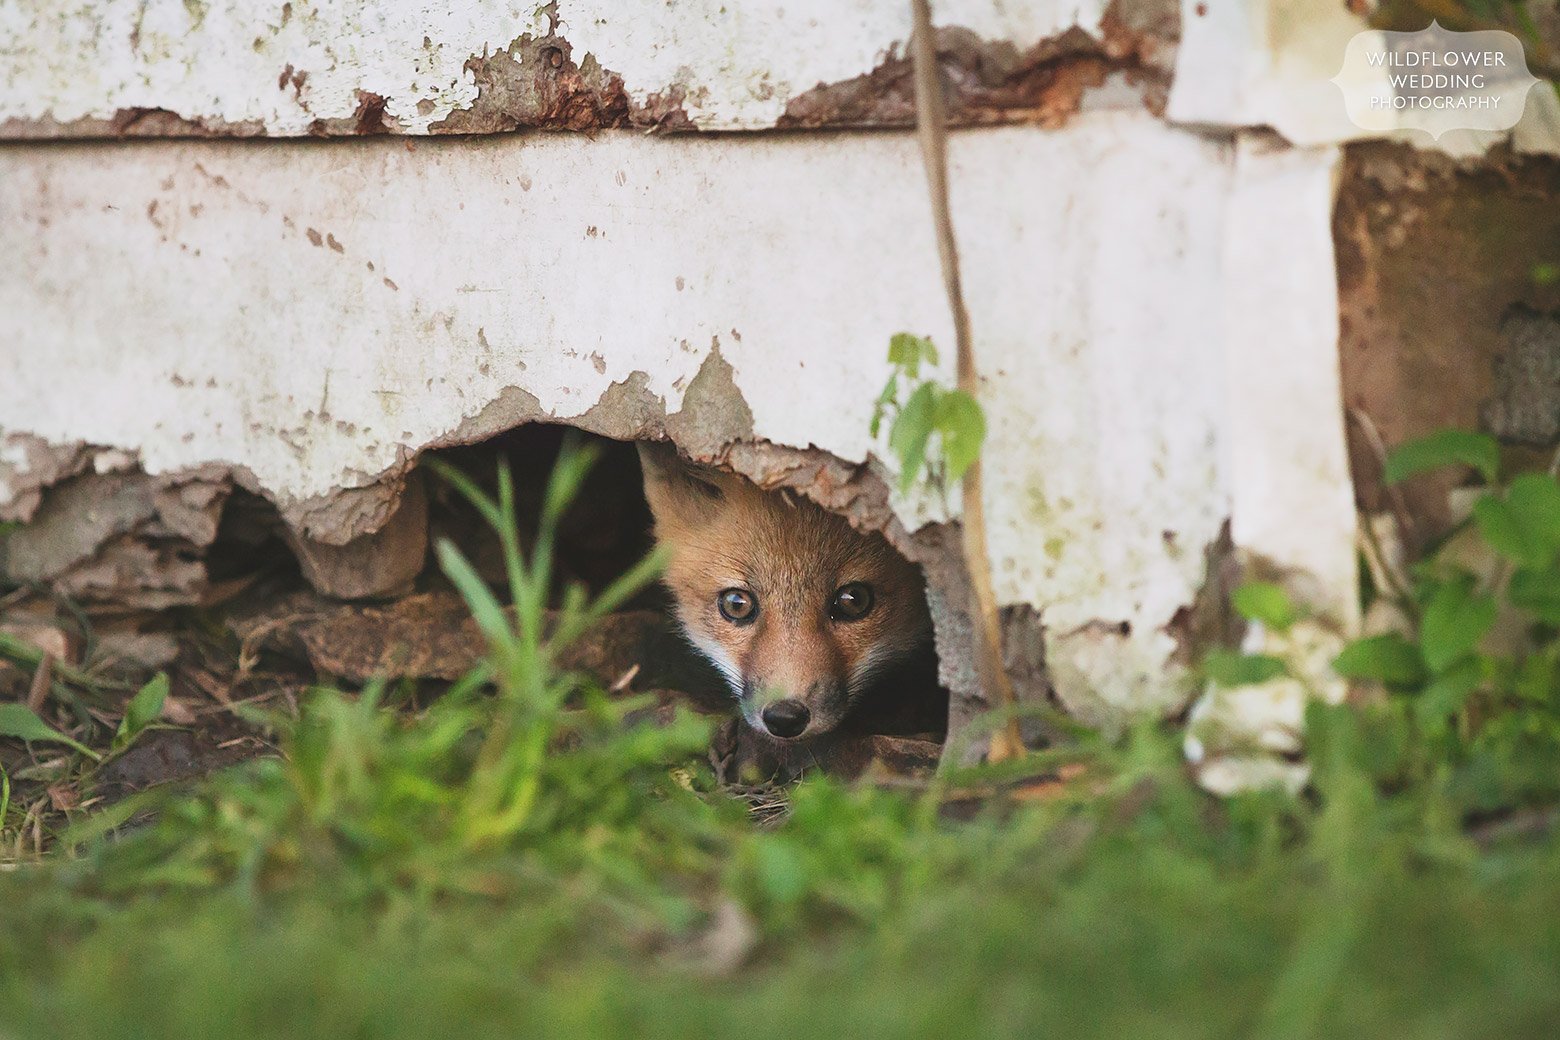 Red fox peeks it's head out from under an abandoned house before our farm engagement session in mid-MO.